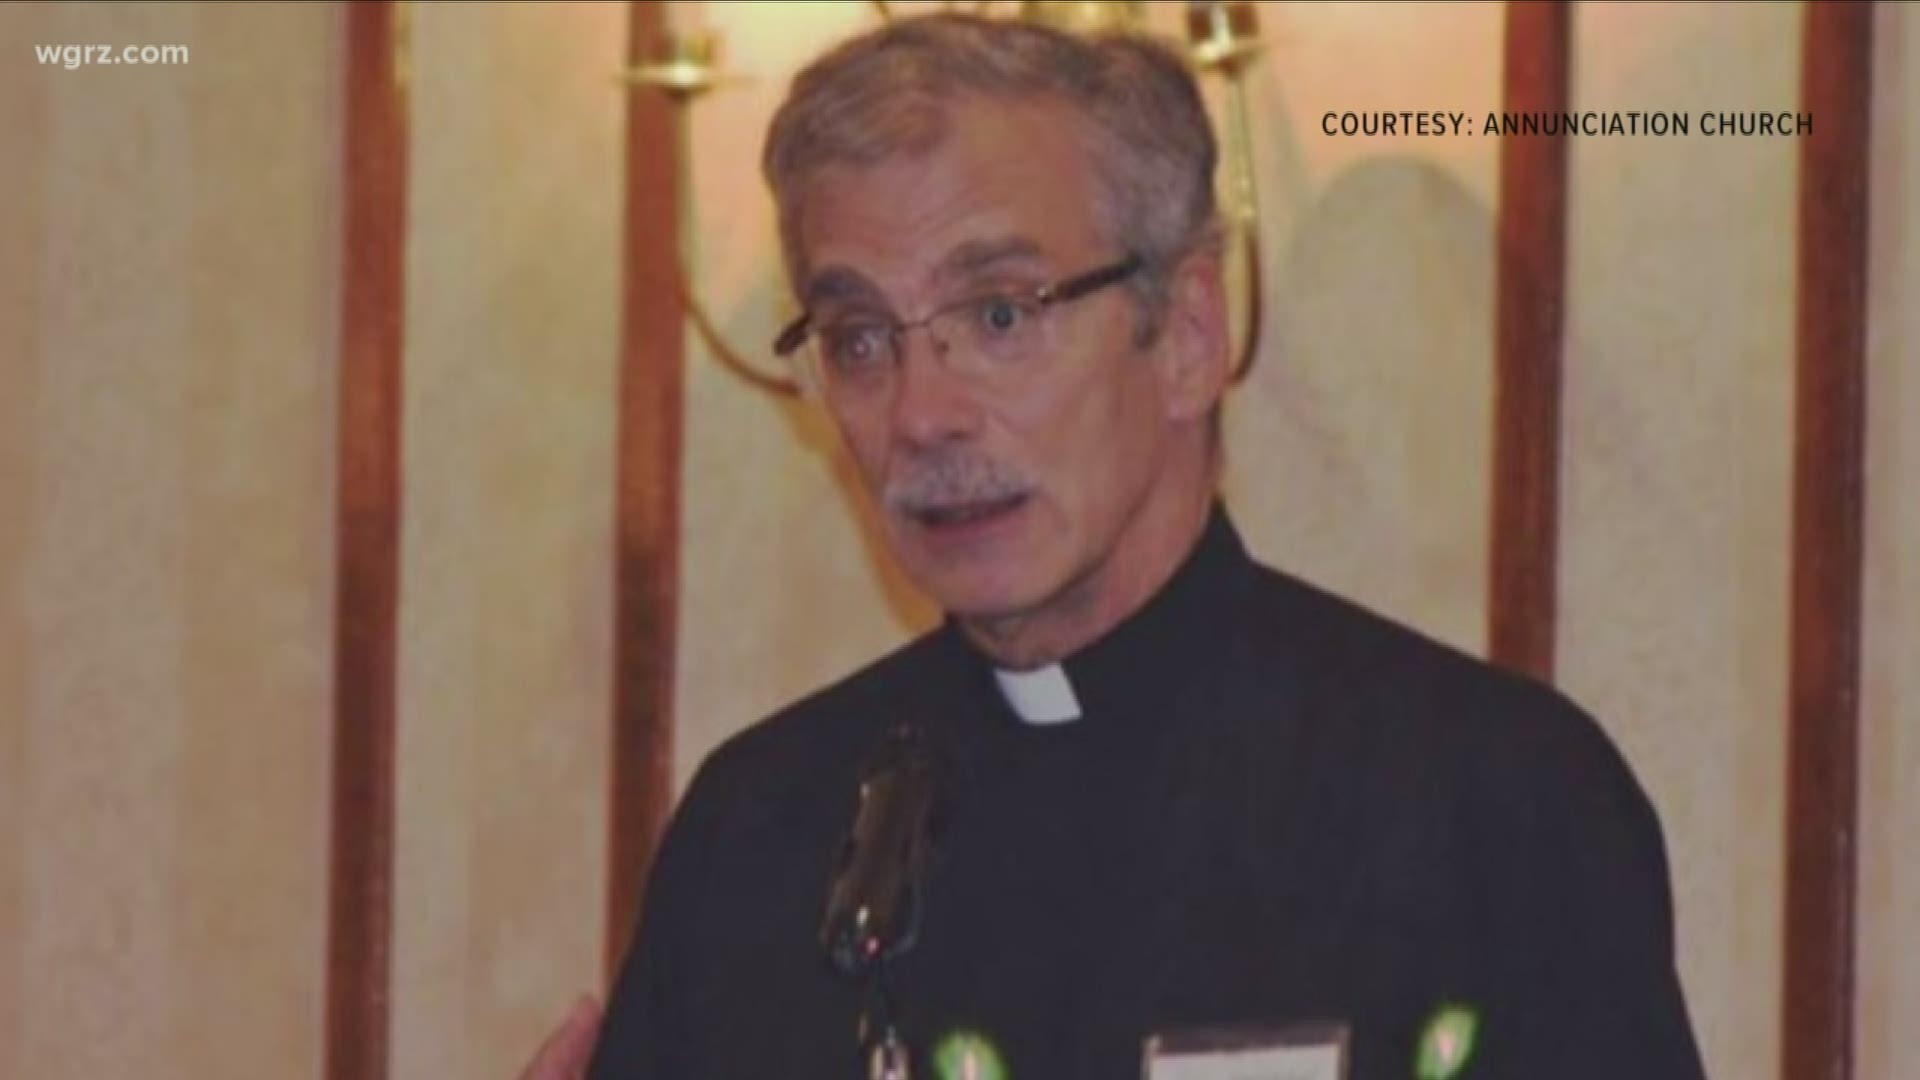 Father Eugene Urich of Elma's Church of Annunciation posted a letter on the church website...